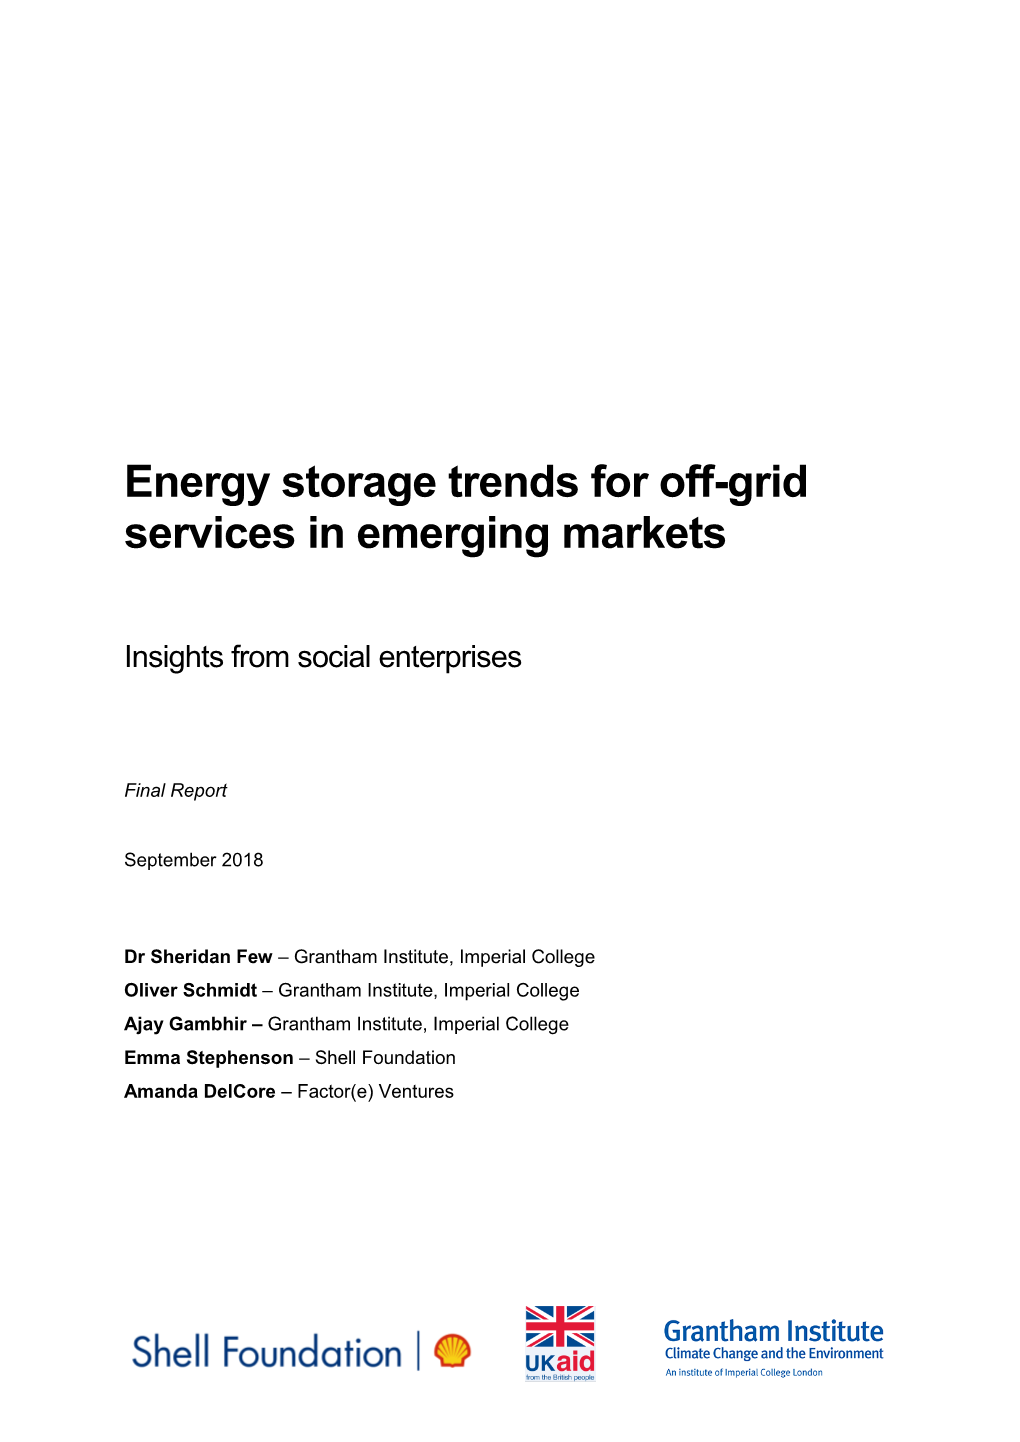 Energy Storage Trends for Off-Grid Services in Emerging Markets